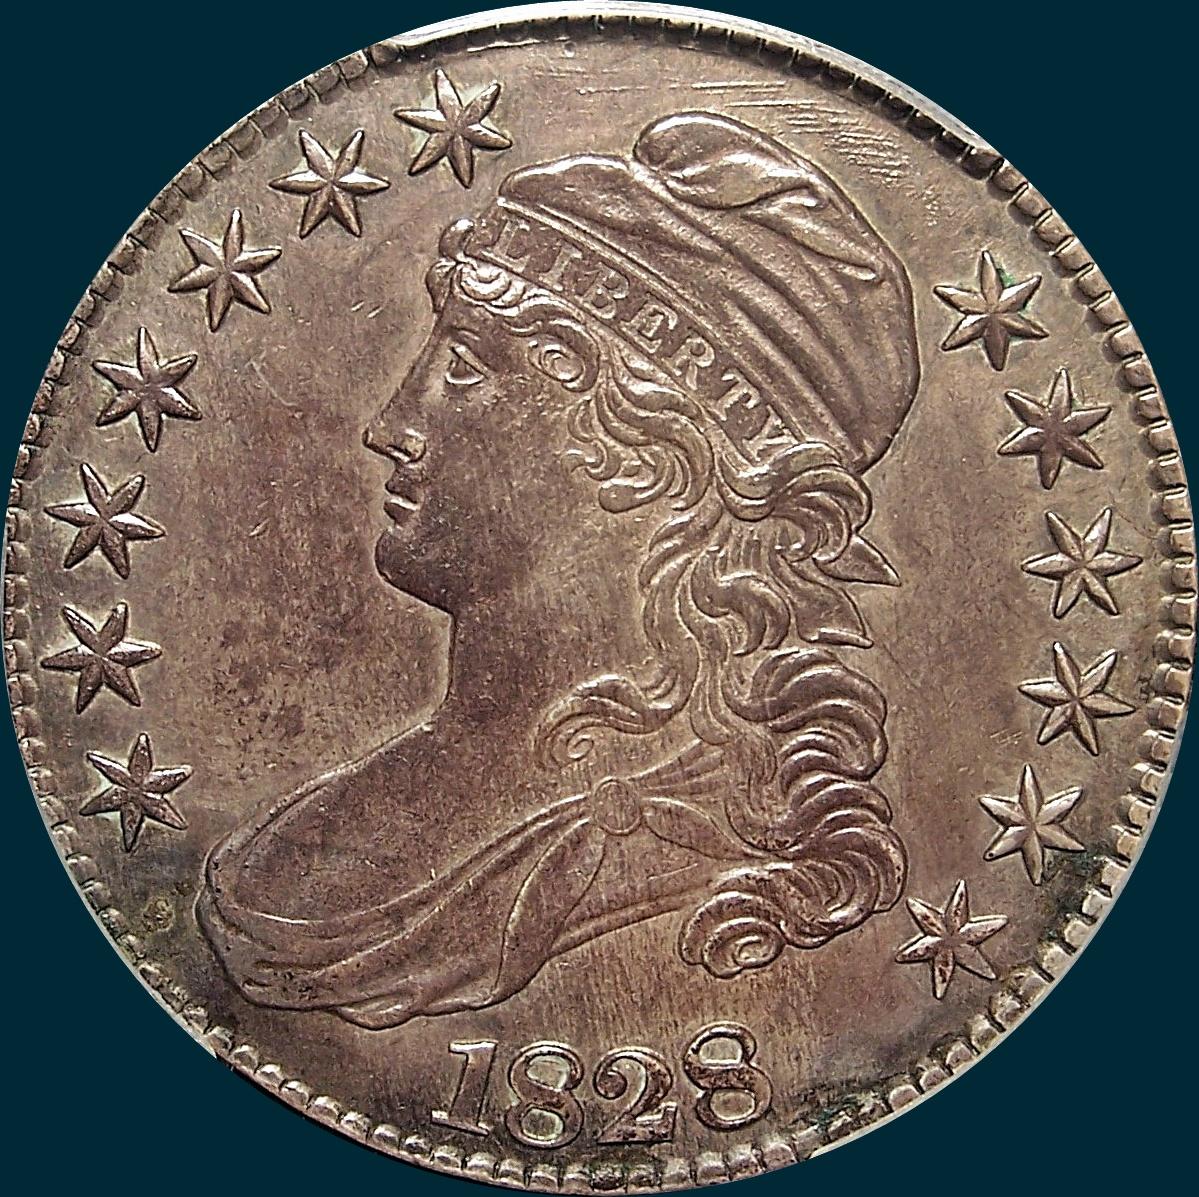 1828, O-109, Square Base 2, Large 8's, Capped Bust Half Dollar